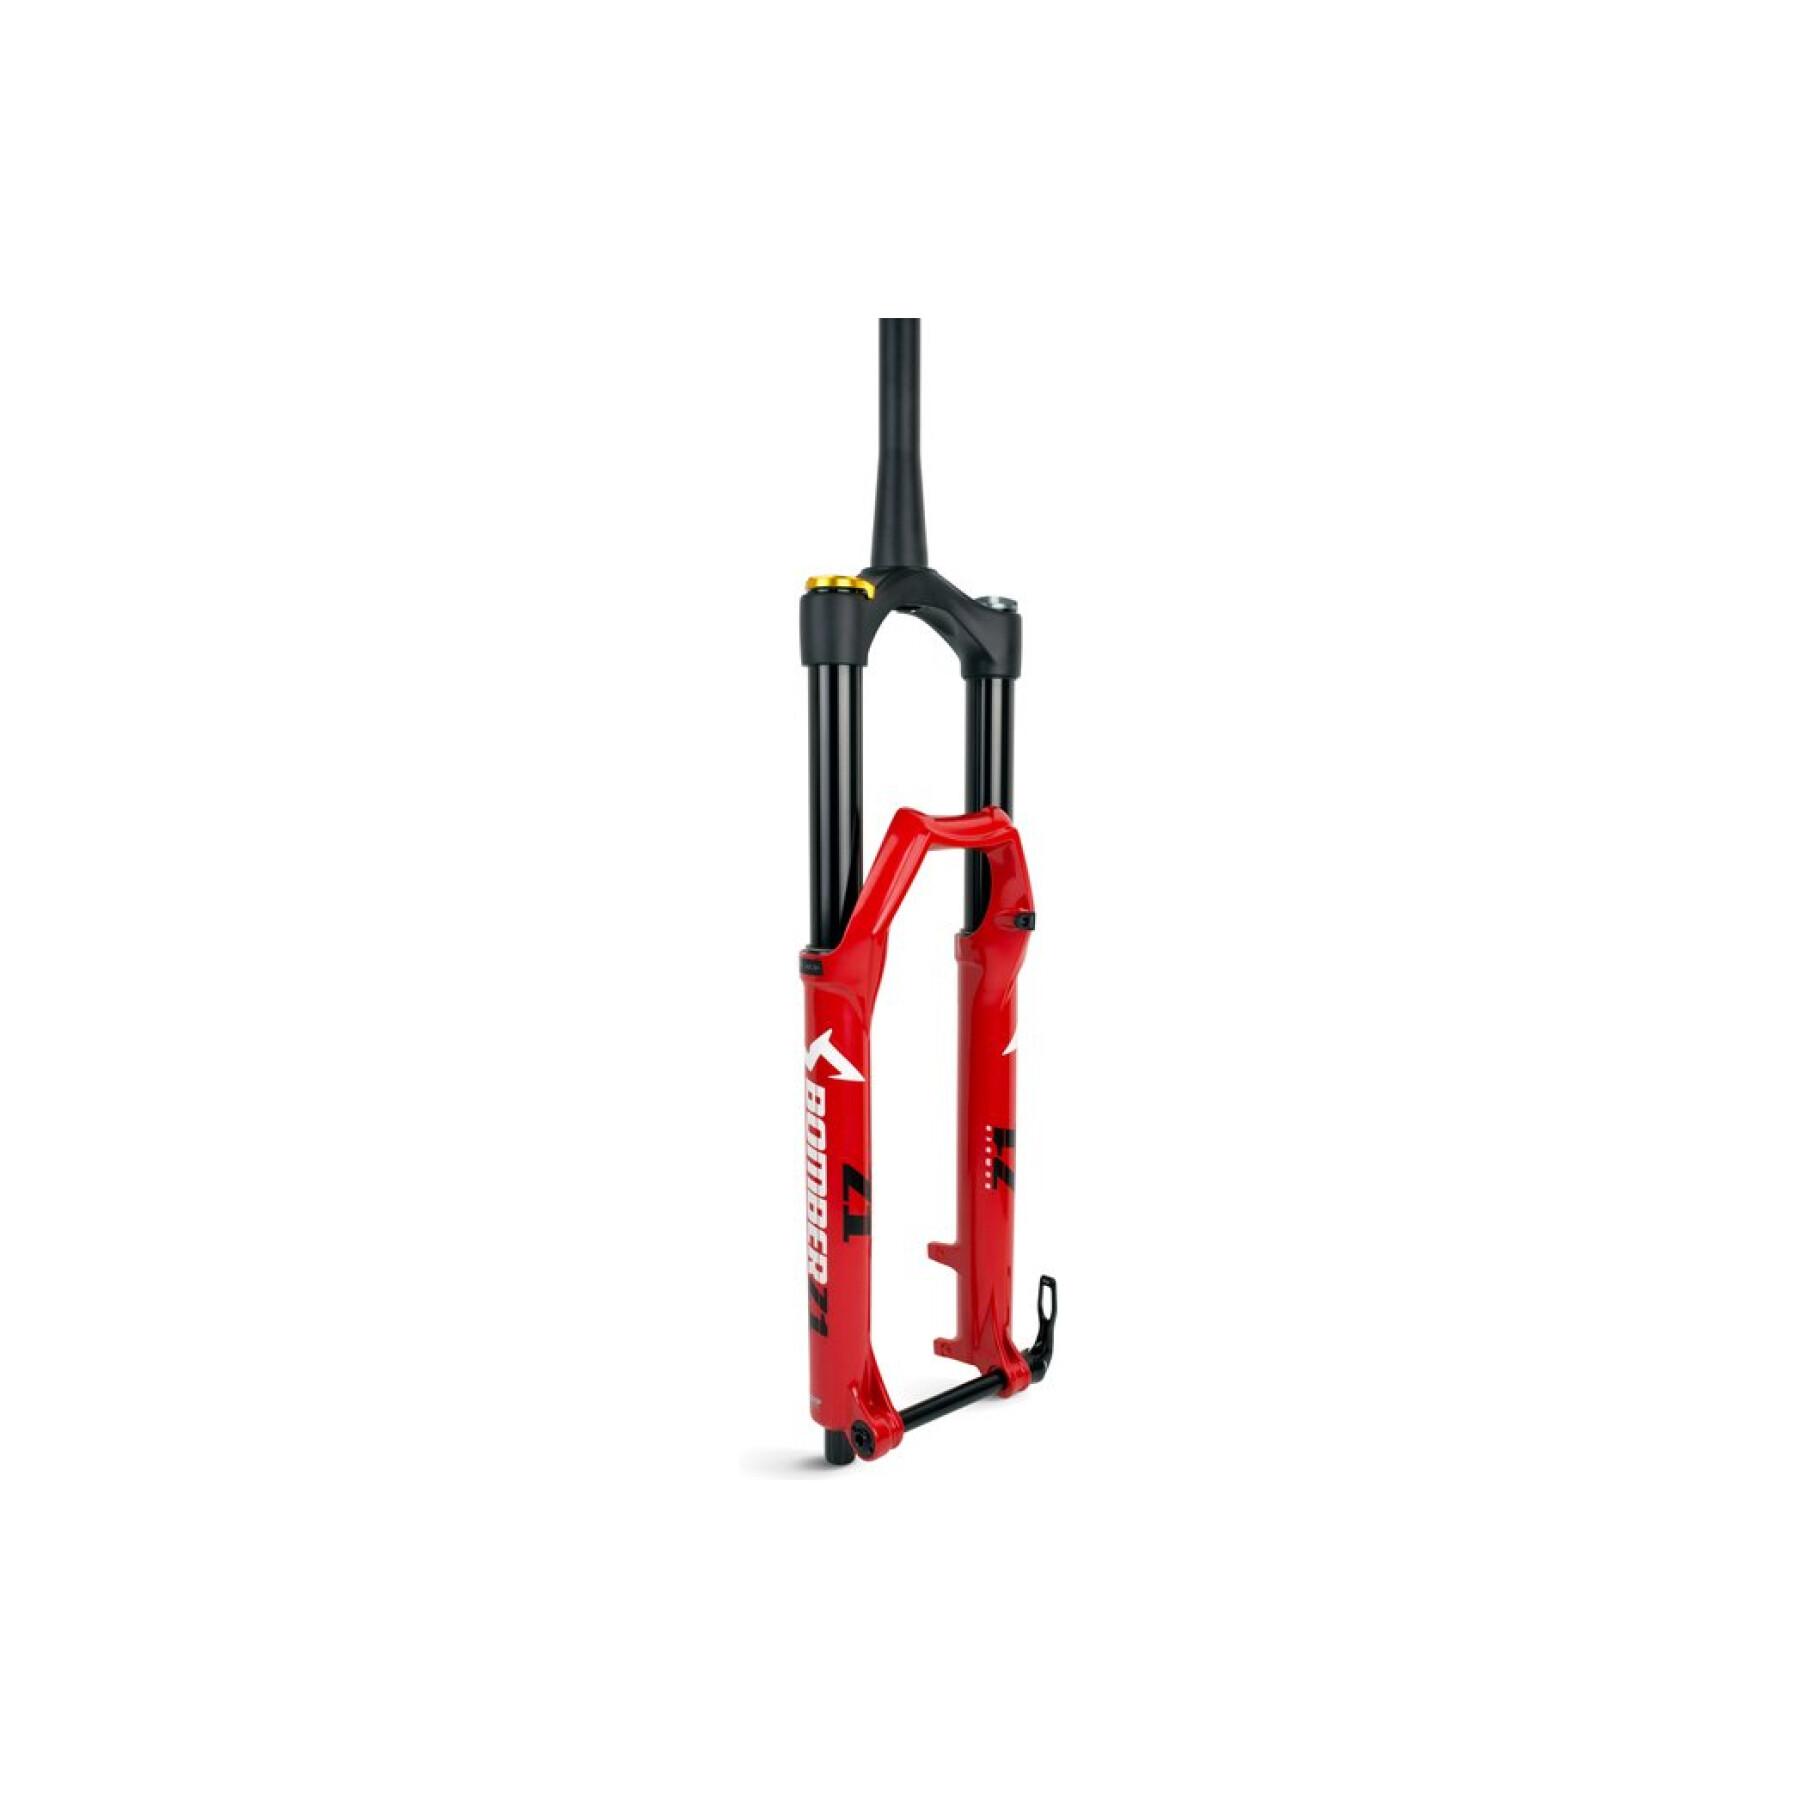 Forcella conica Marzocchi bomber Z1 29" Air 170 Grip Sweep-Adj